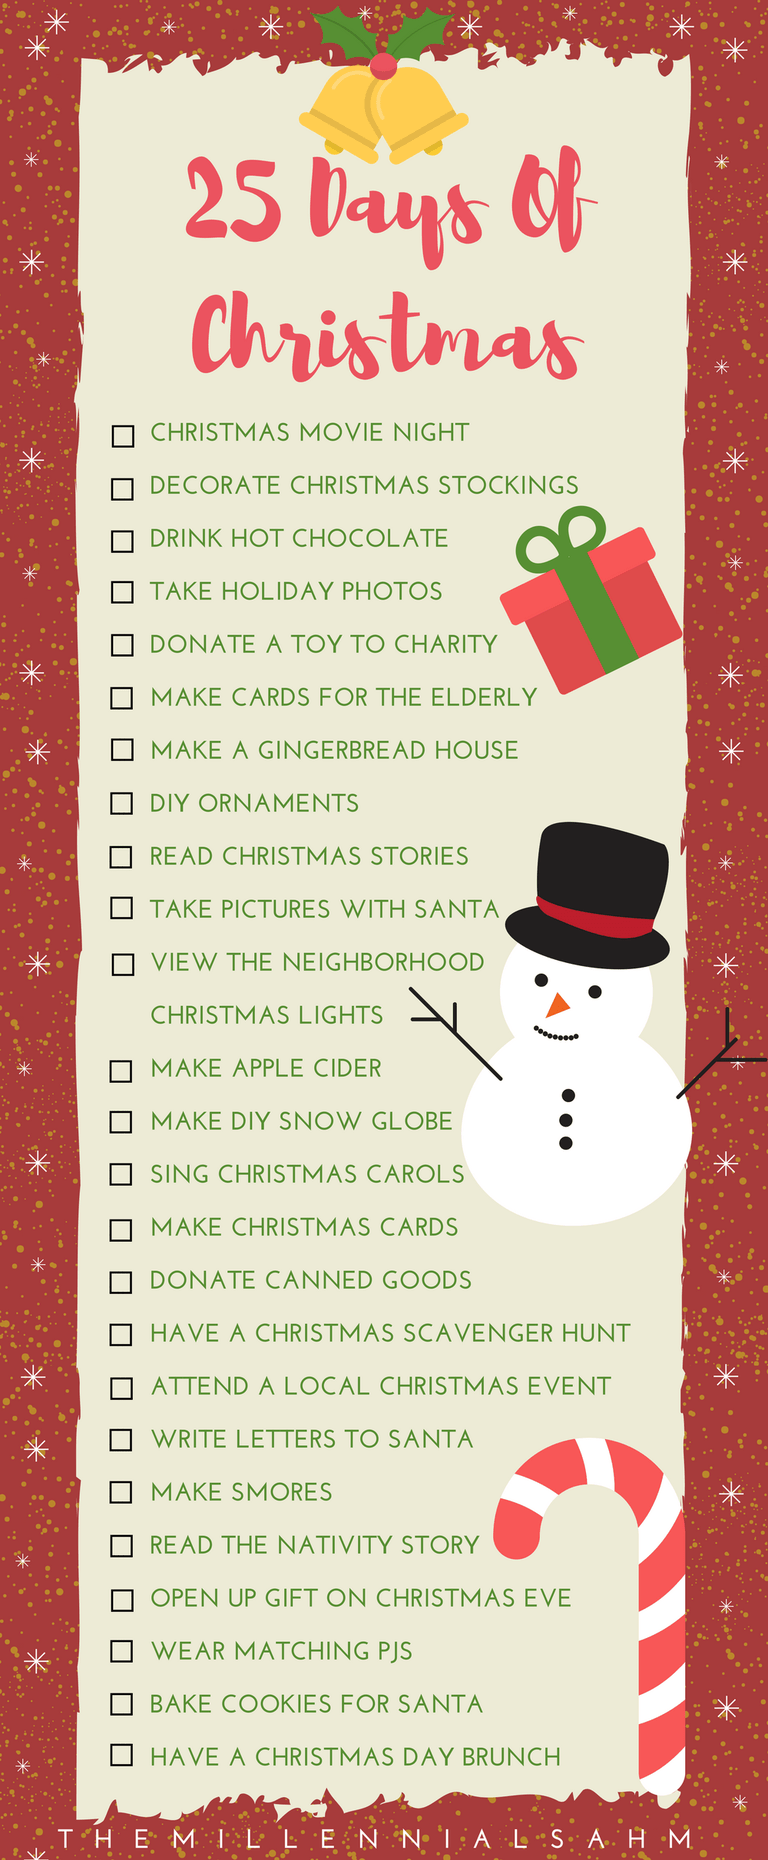 25 Days of Christmas - Holiday Traditions Your Family Will Love -   18 holiday Activities christmas ideas